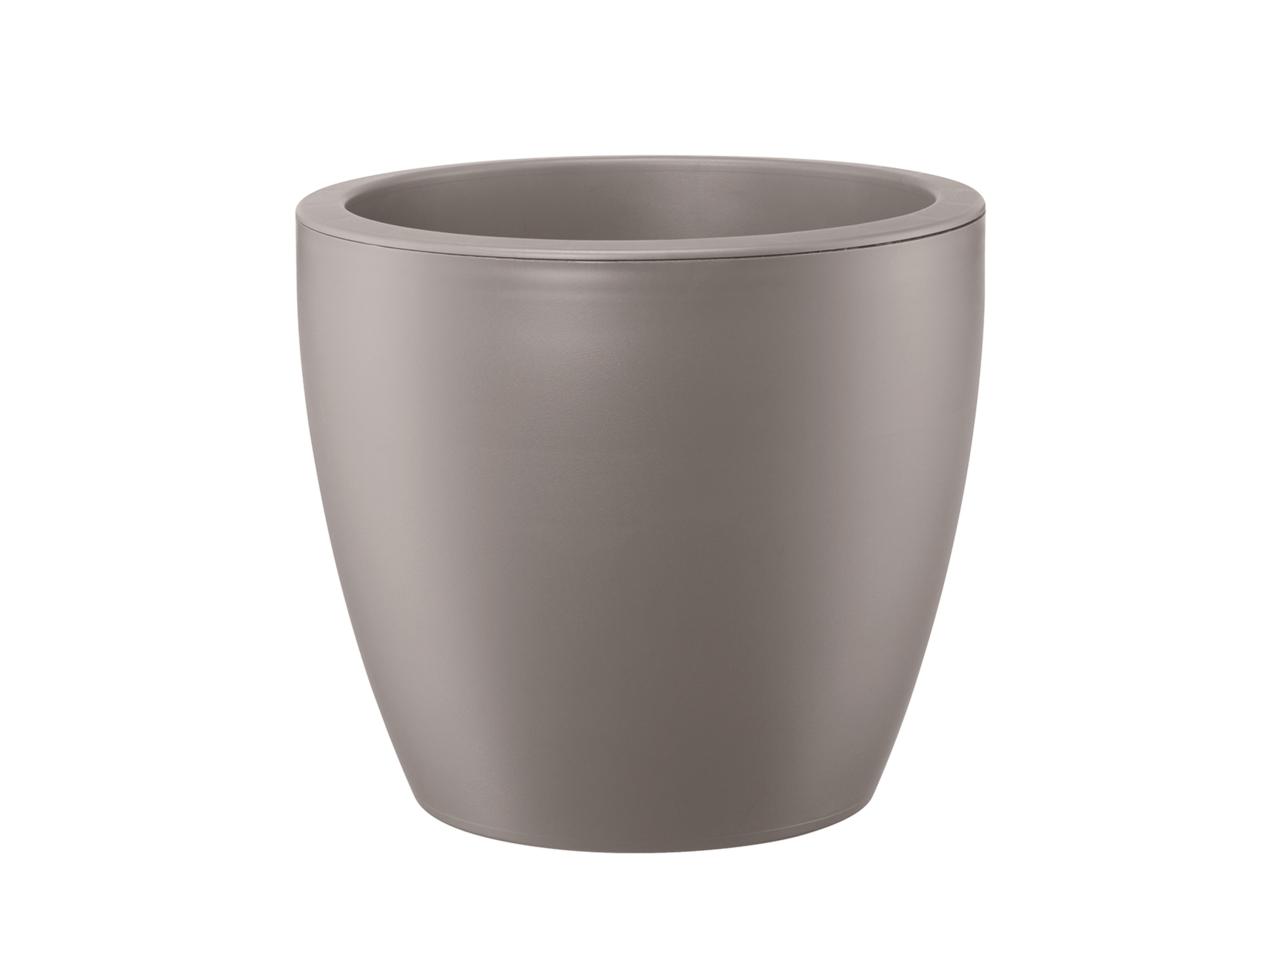 Florabest Plant Pot - Available from 30th April1